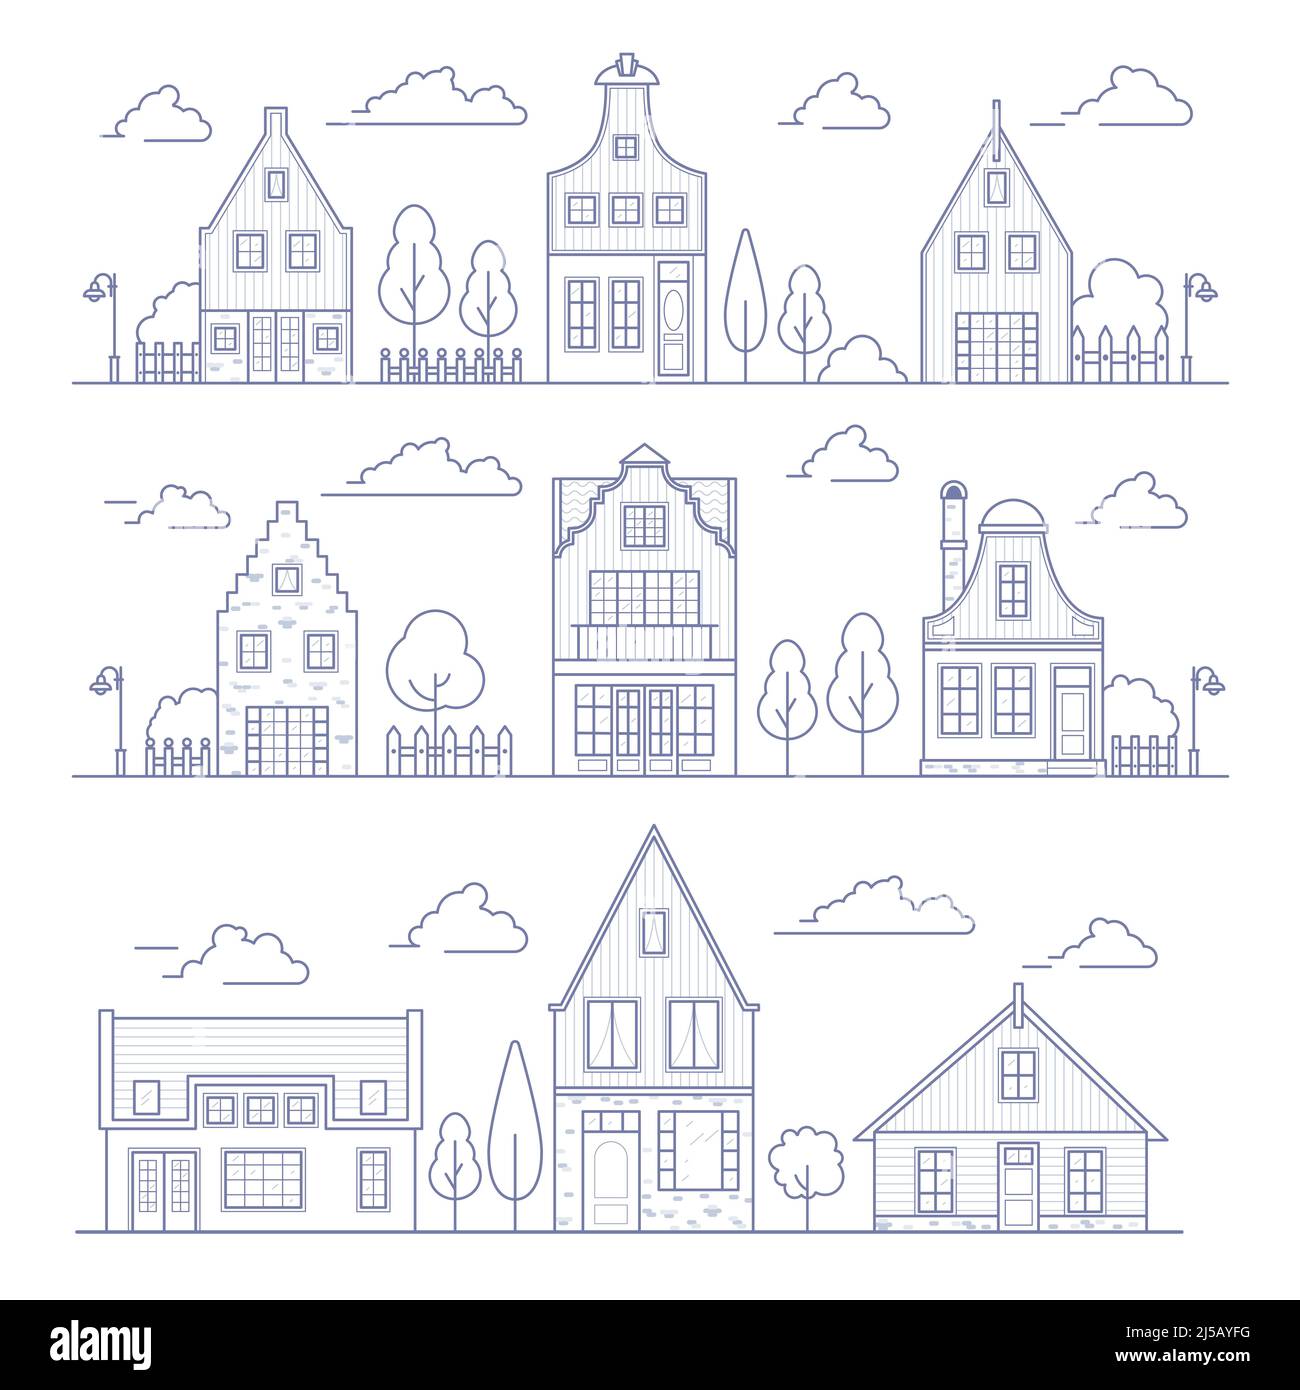 Europe neighborhood houses. Holland suburban with cozy homes. Facades of old traditionsl buildings in Netherlands. landscape outline vector Stock Vector